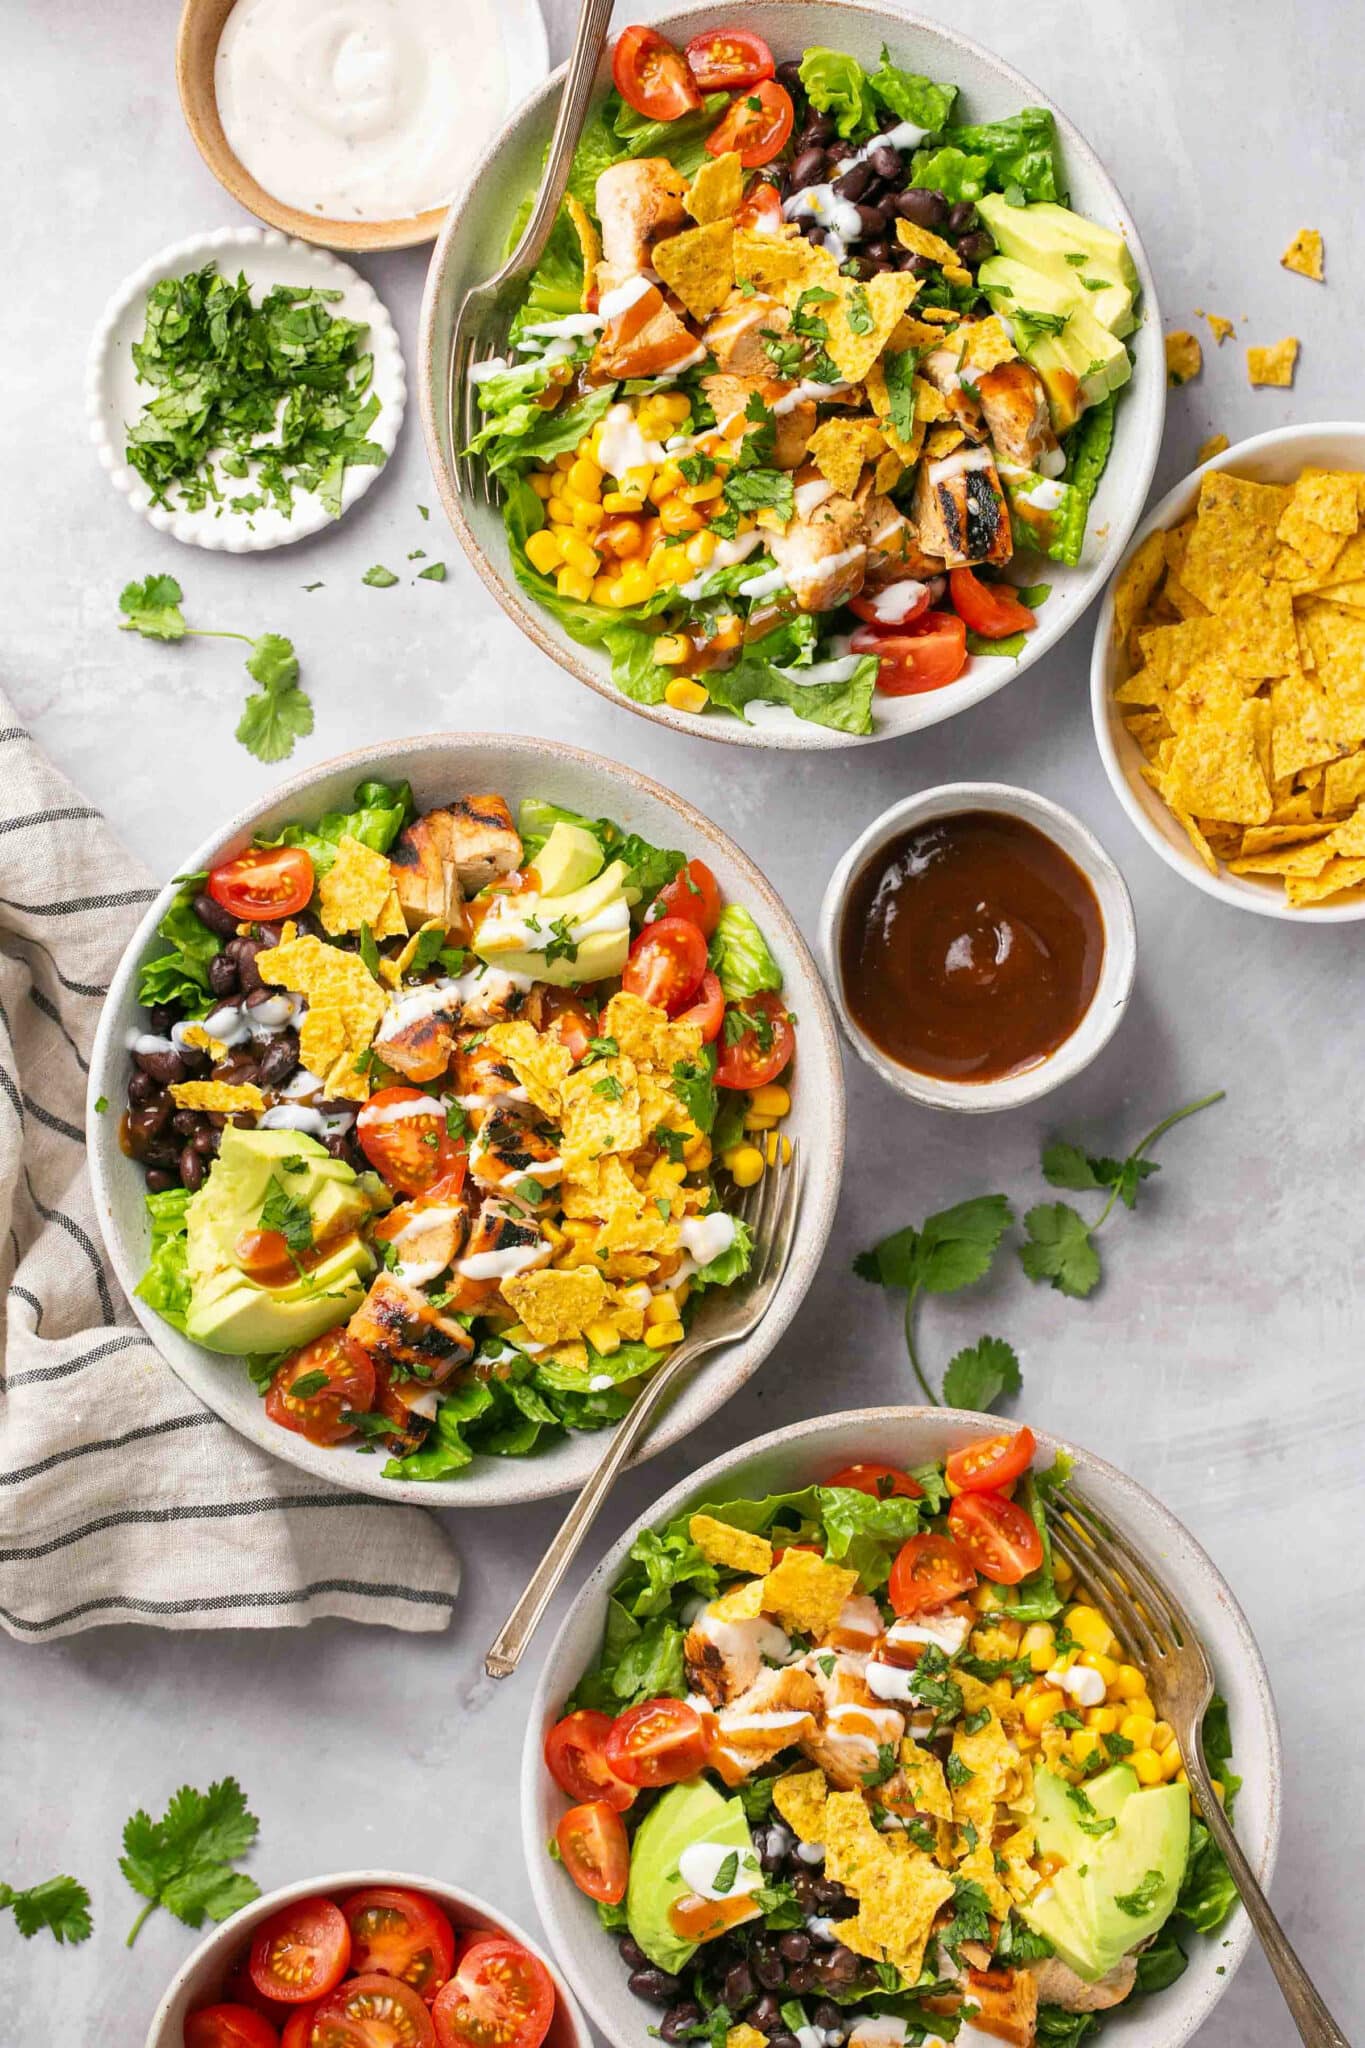 Salads in white bowls topped with grilled chicken, avocado and chips.